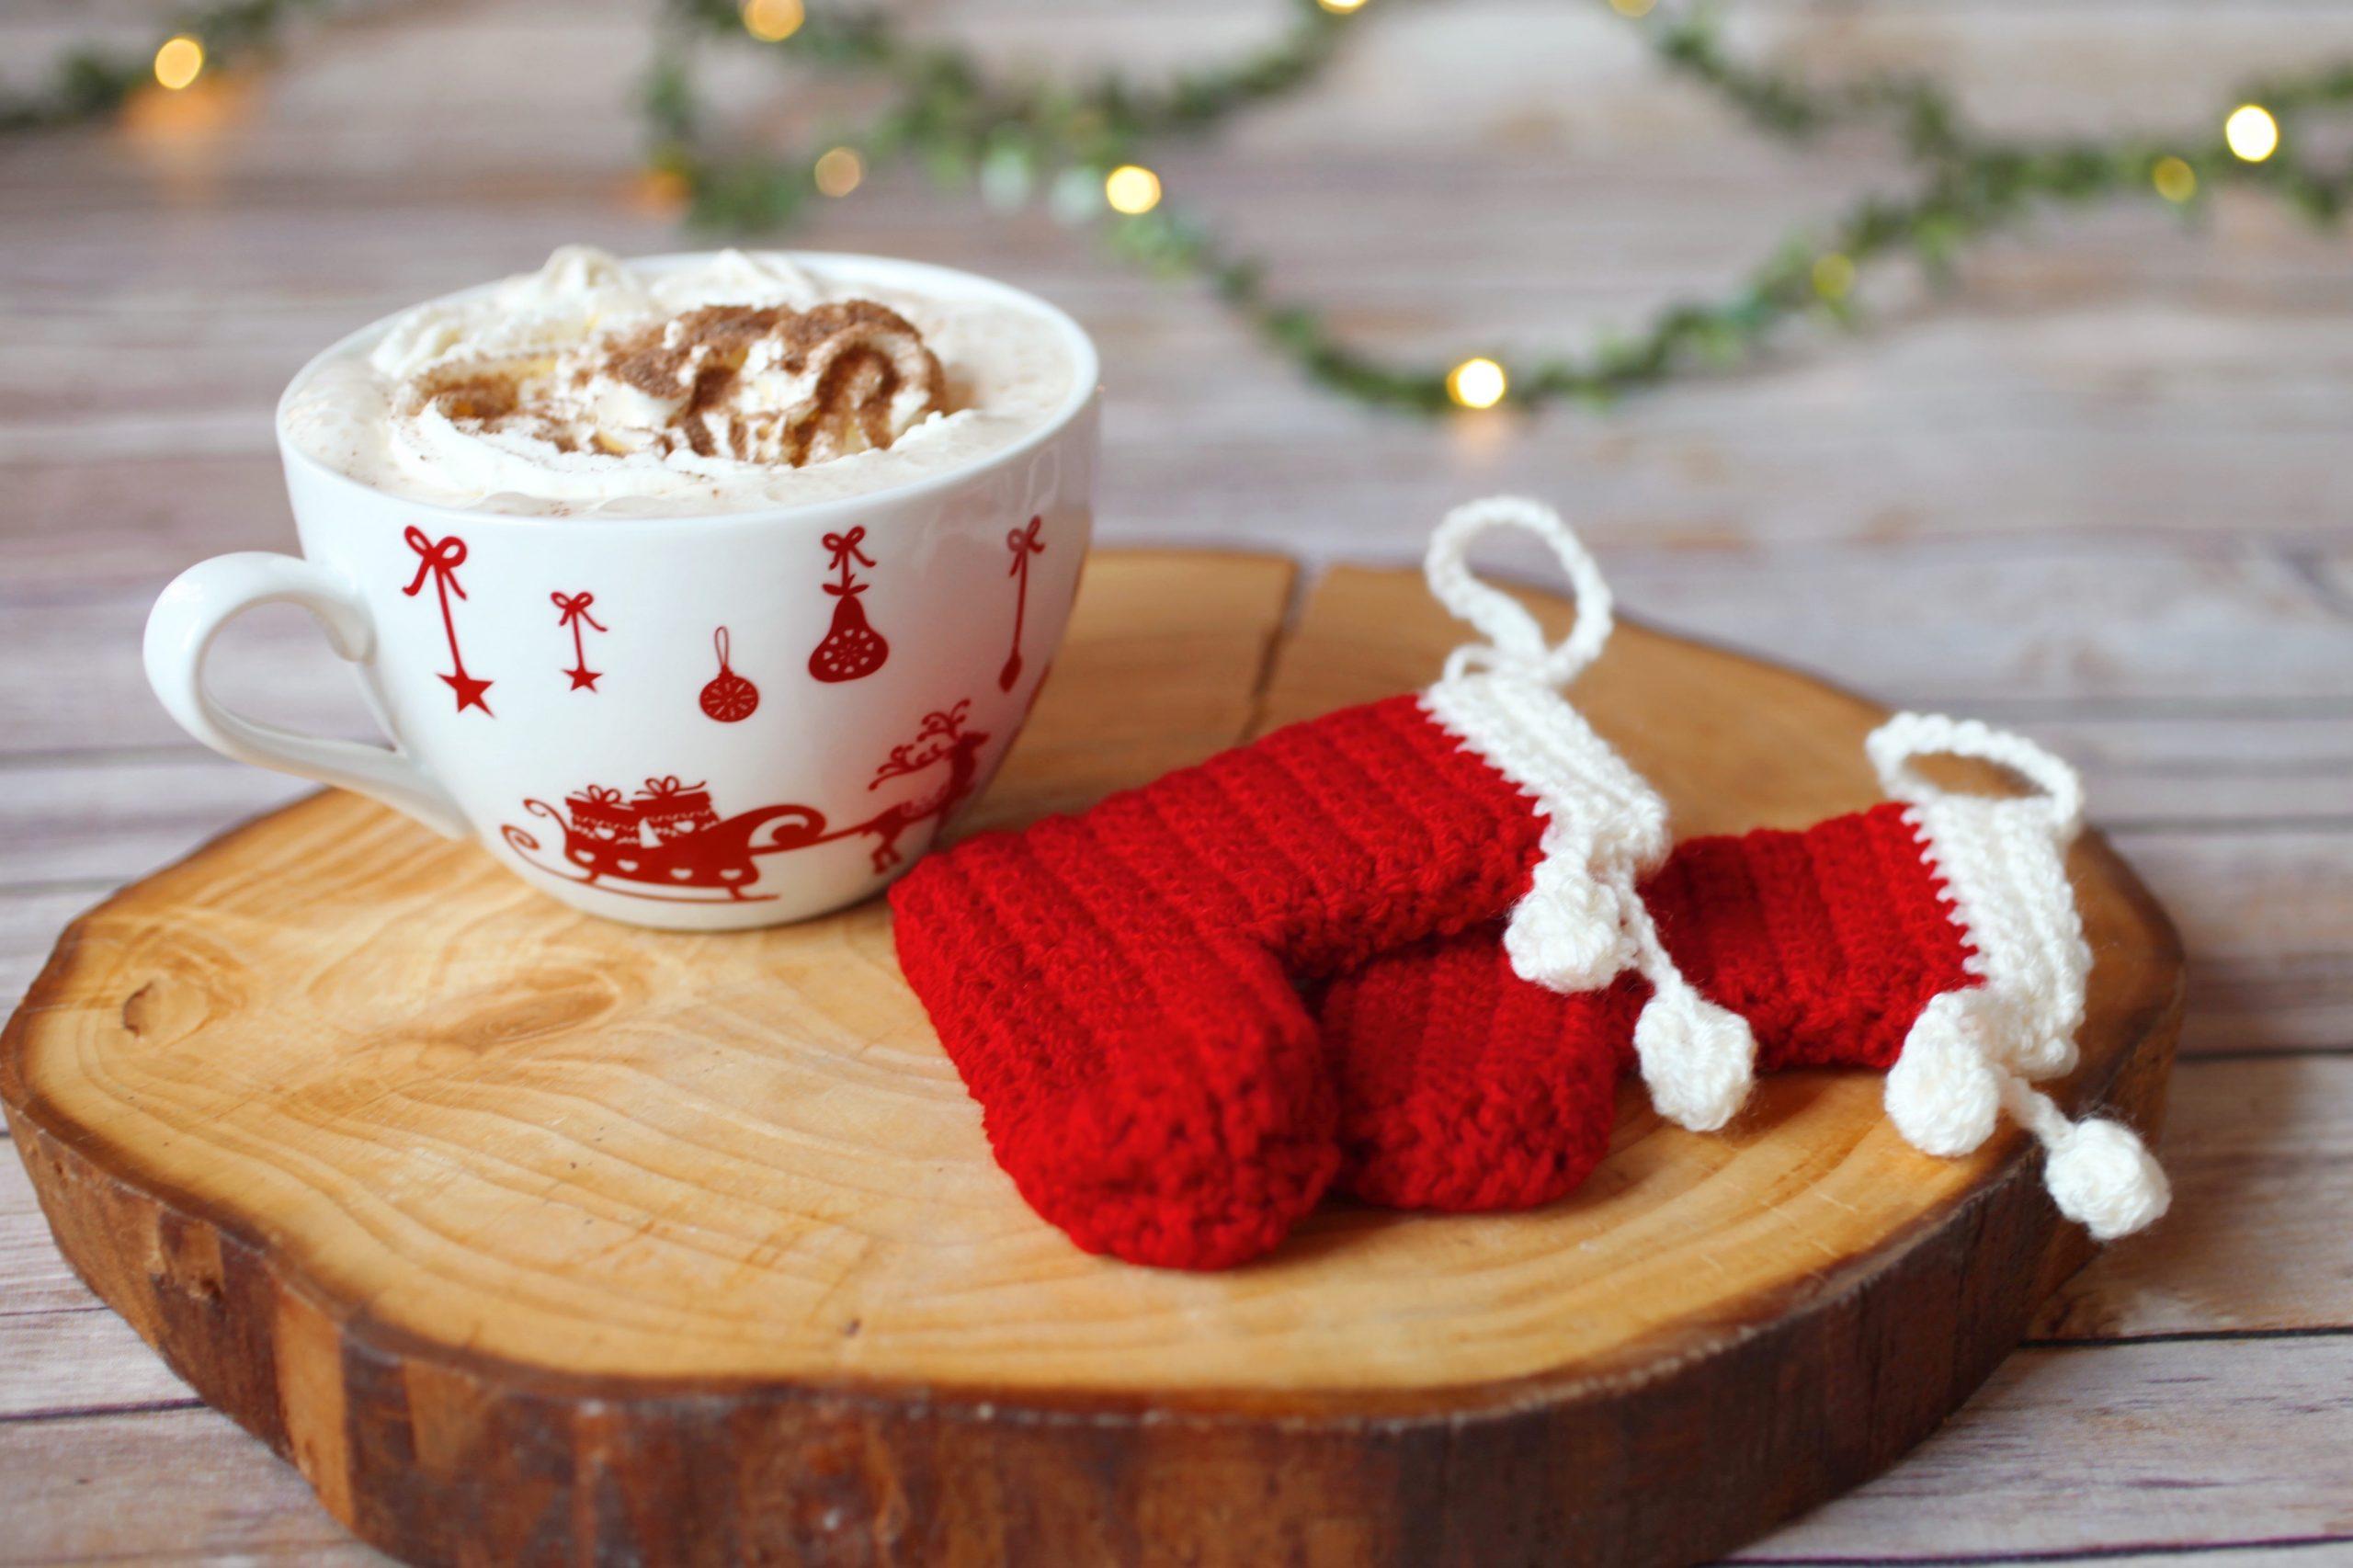 two Christmas Crochet Stockings made with red and cream yarn lay on a log slice alongside a Christmas mug filled with cream and chocolate sprinkles